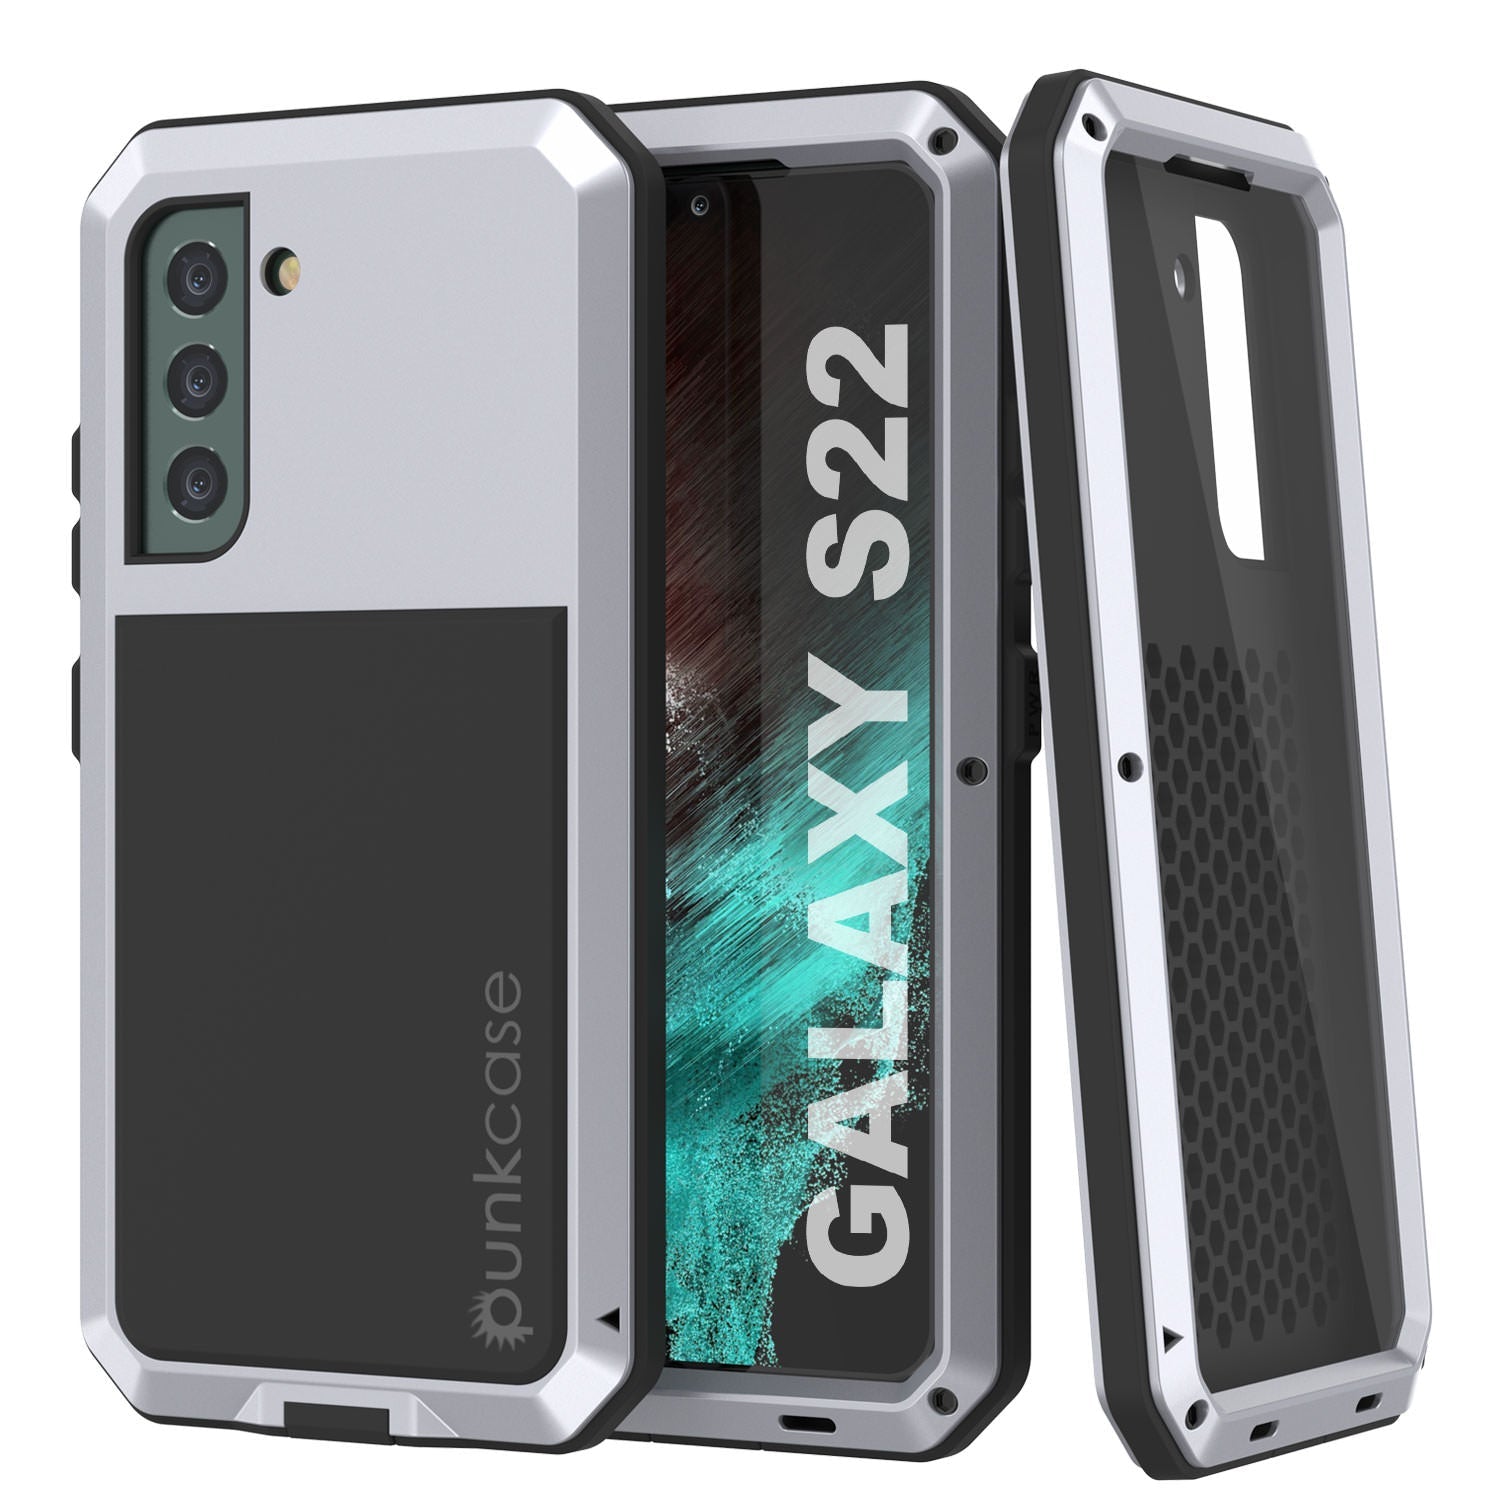 Galaxy S22 Metal Case, Heavy Duty Military Grade Rugged Armor Cover [White]